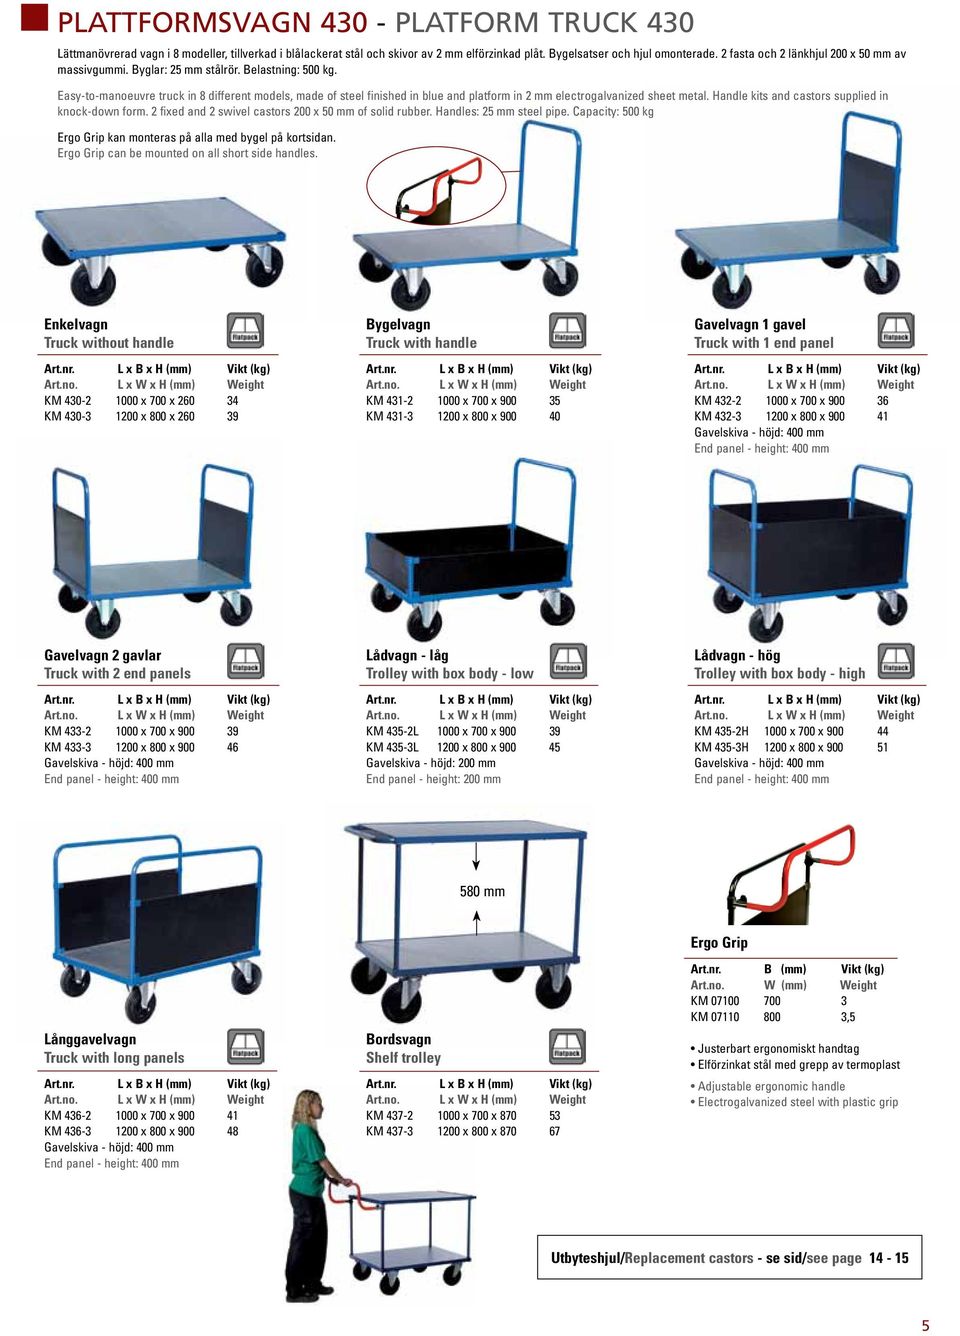 Easy-to-manoeuvre truck in 8 different models, made of steel finished in blue and platform in 2 mm electrogalvanized sheet metal. Handle kits and castors supplied in knock-down form.